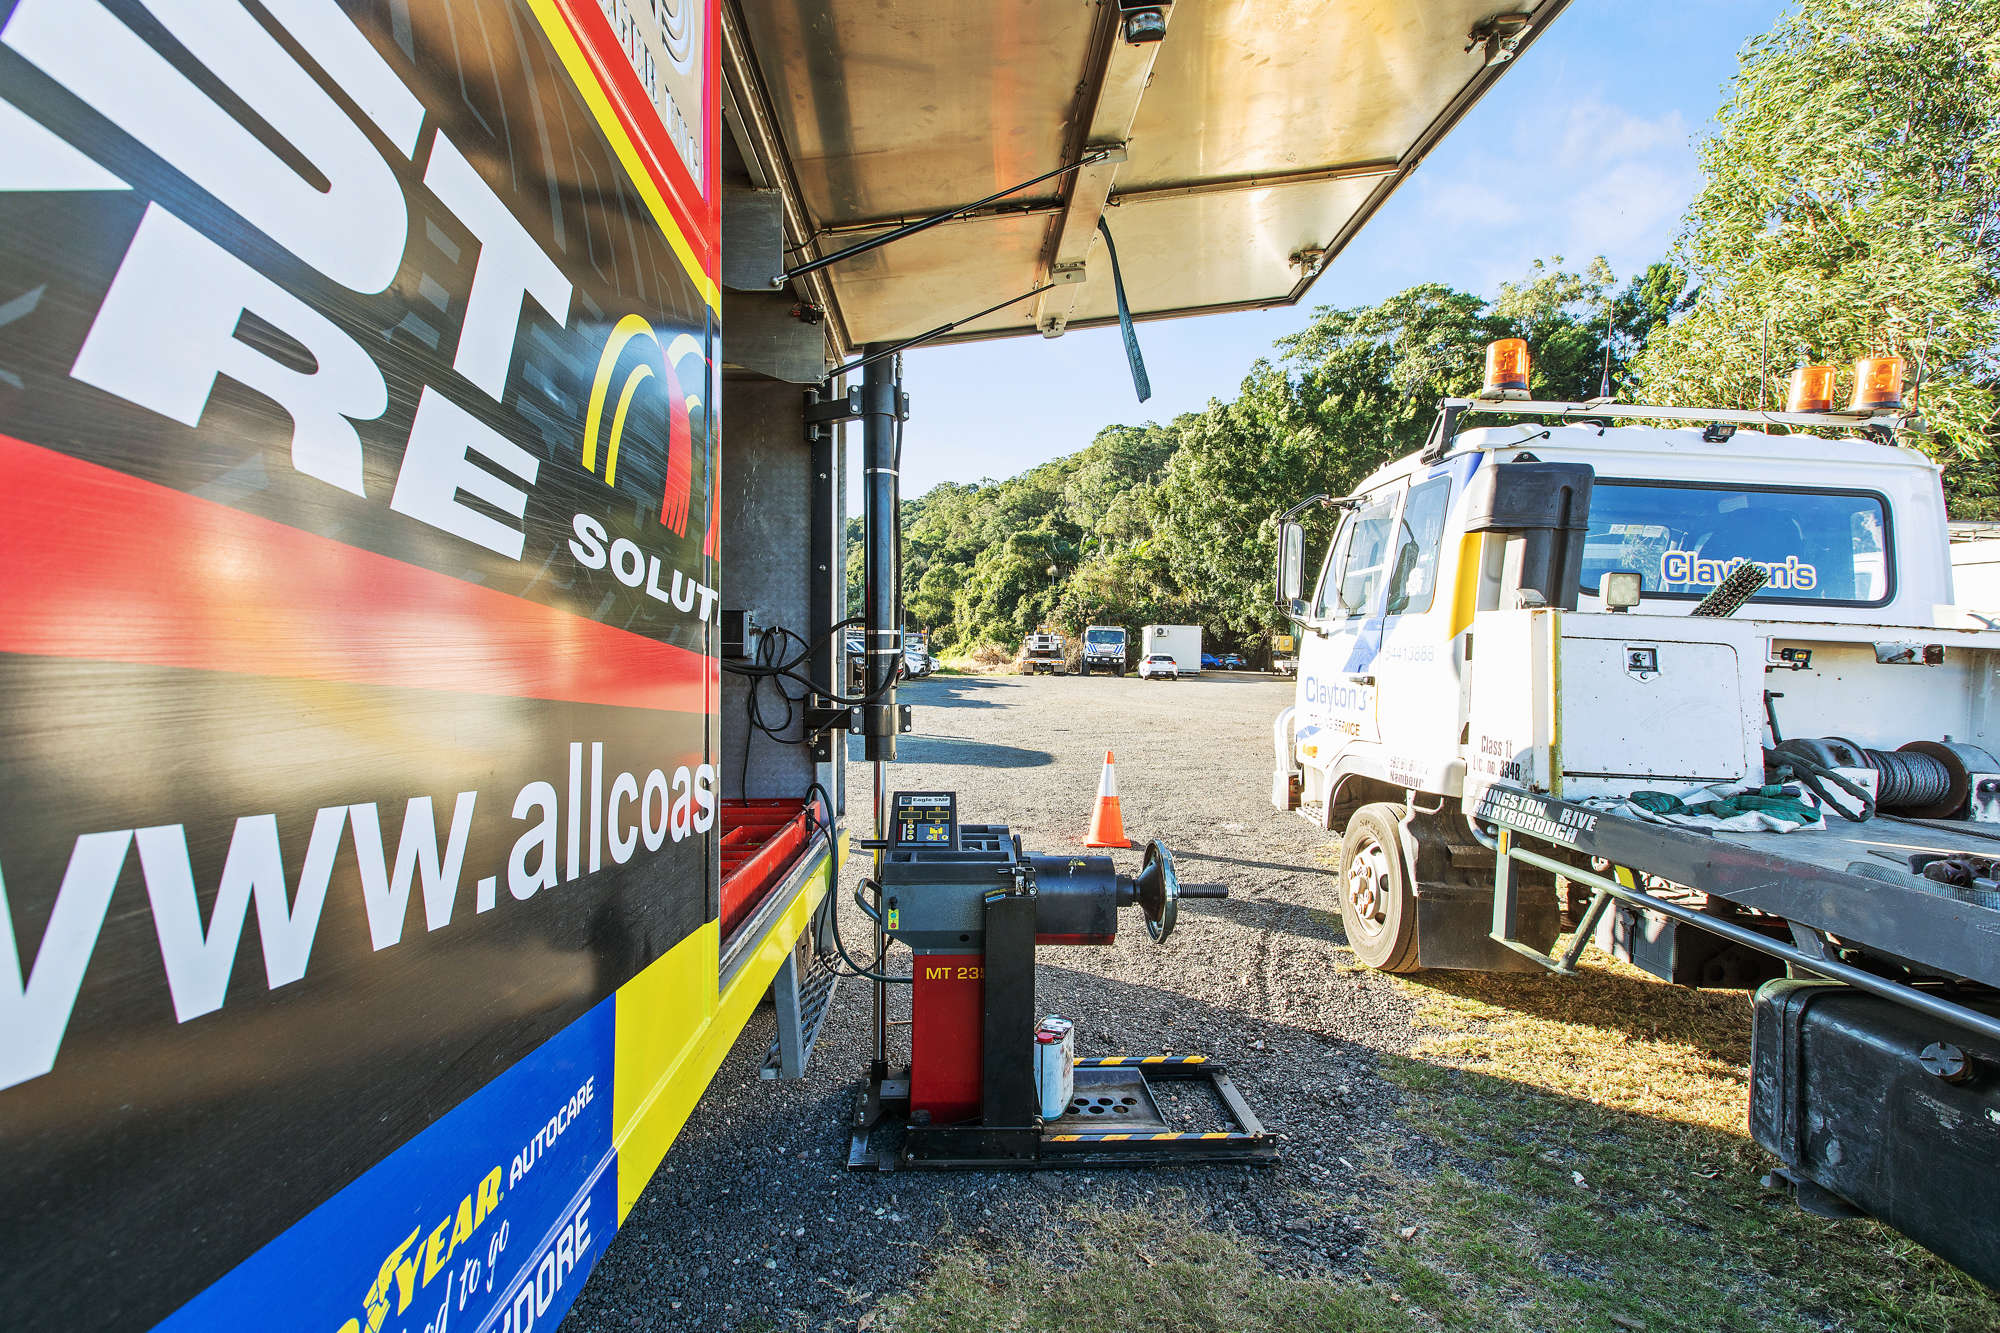 All Coast Tyres - Call out Services